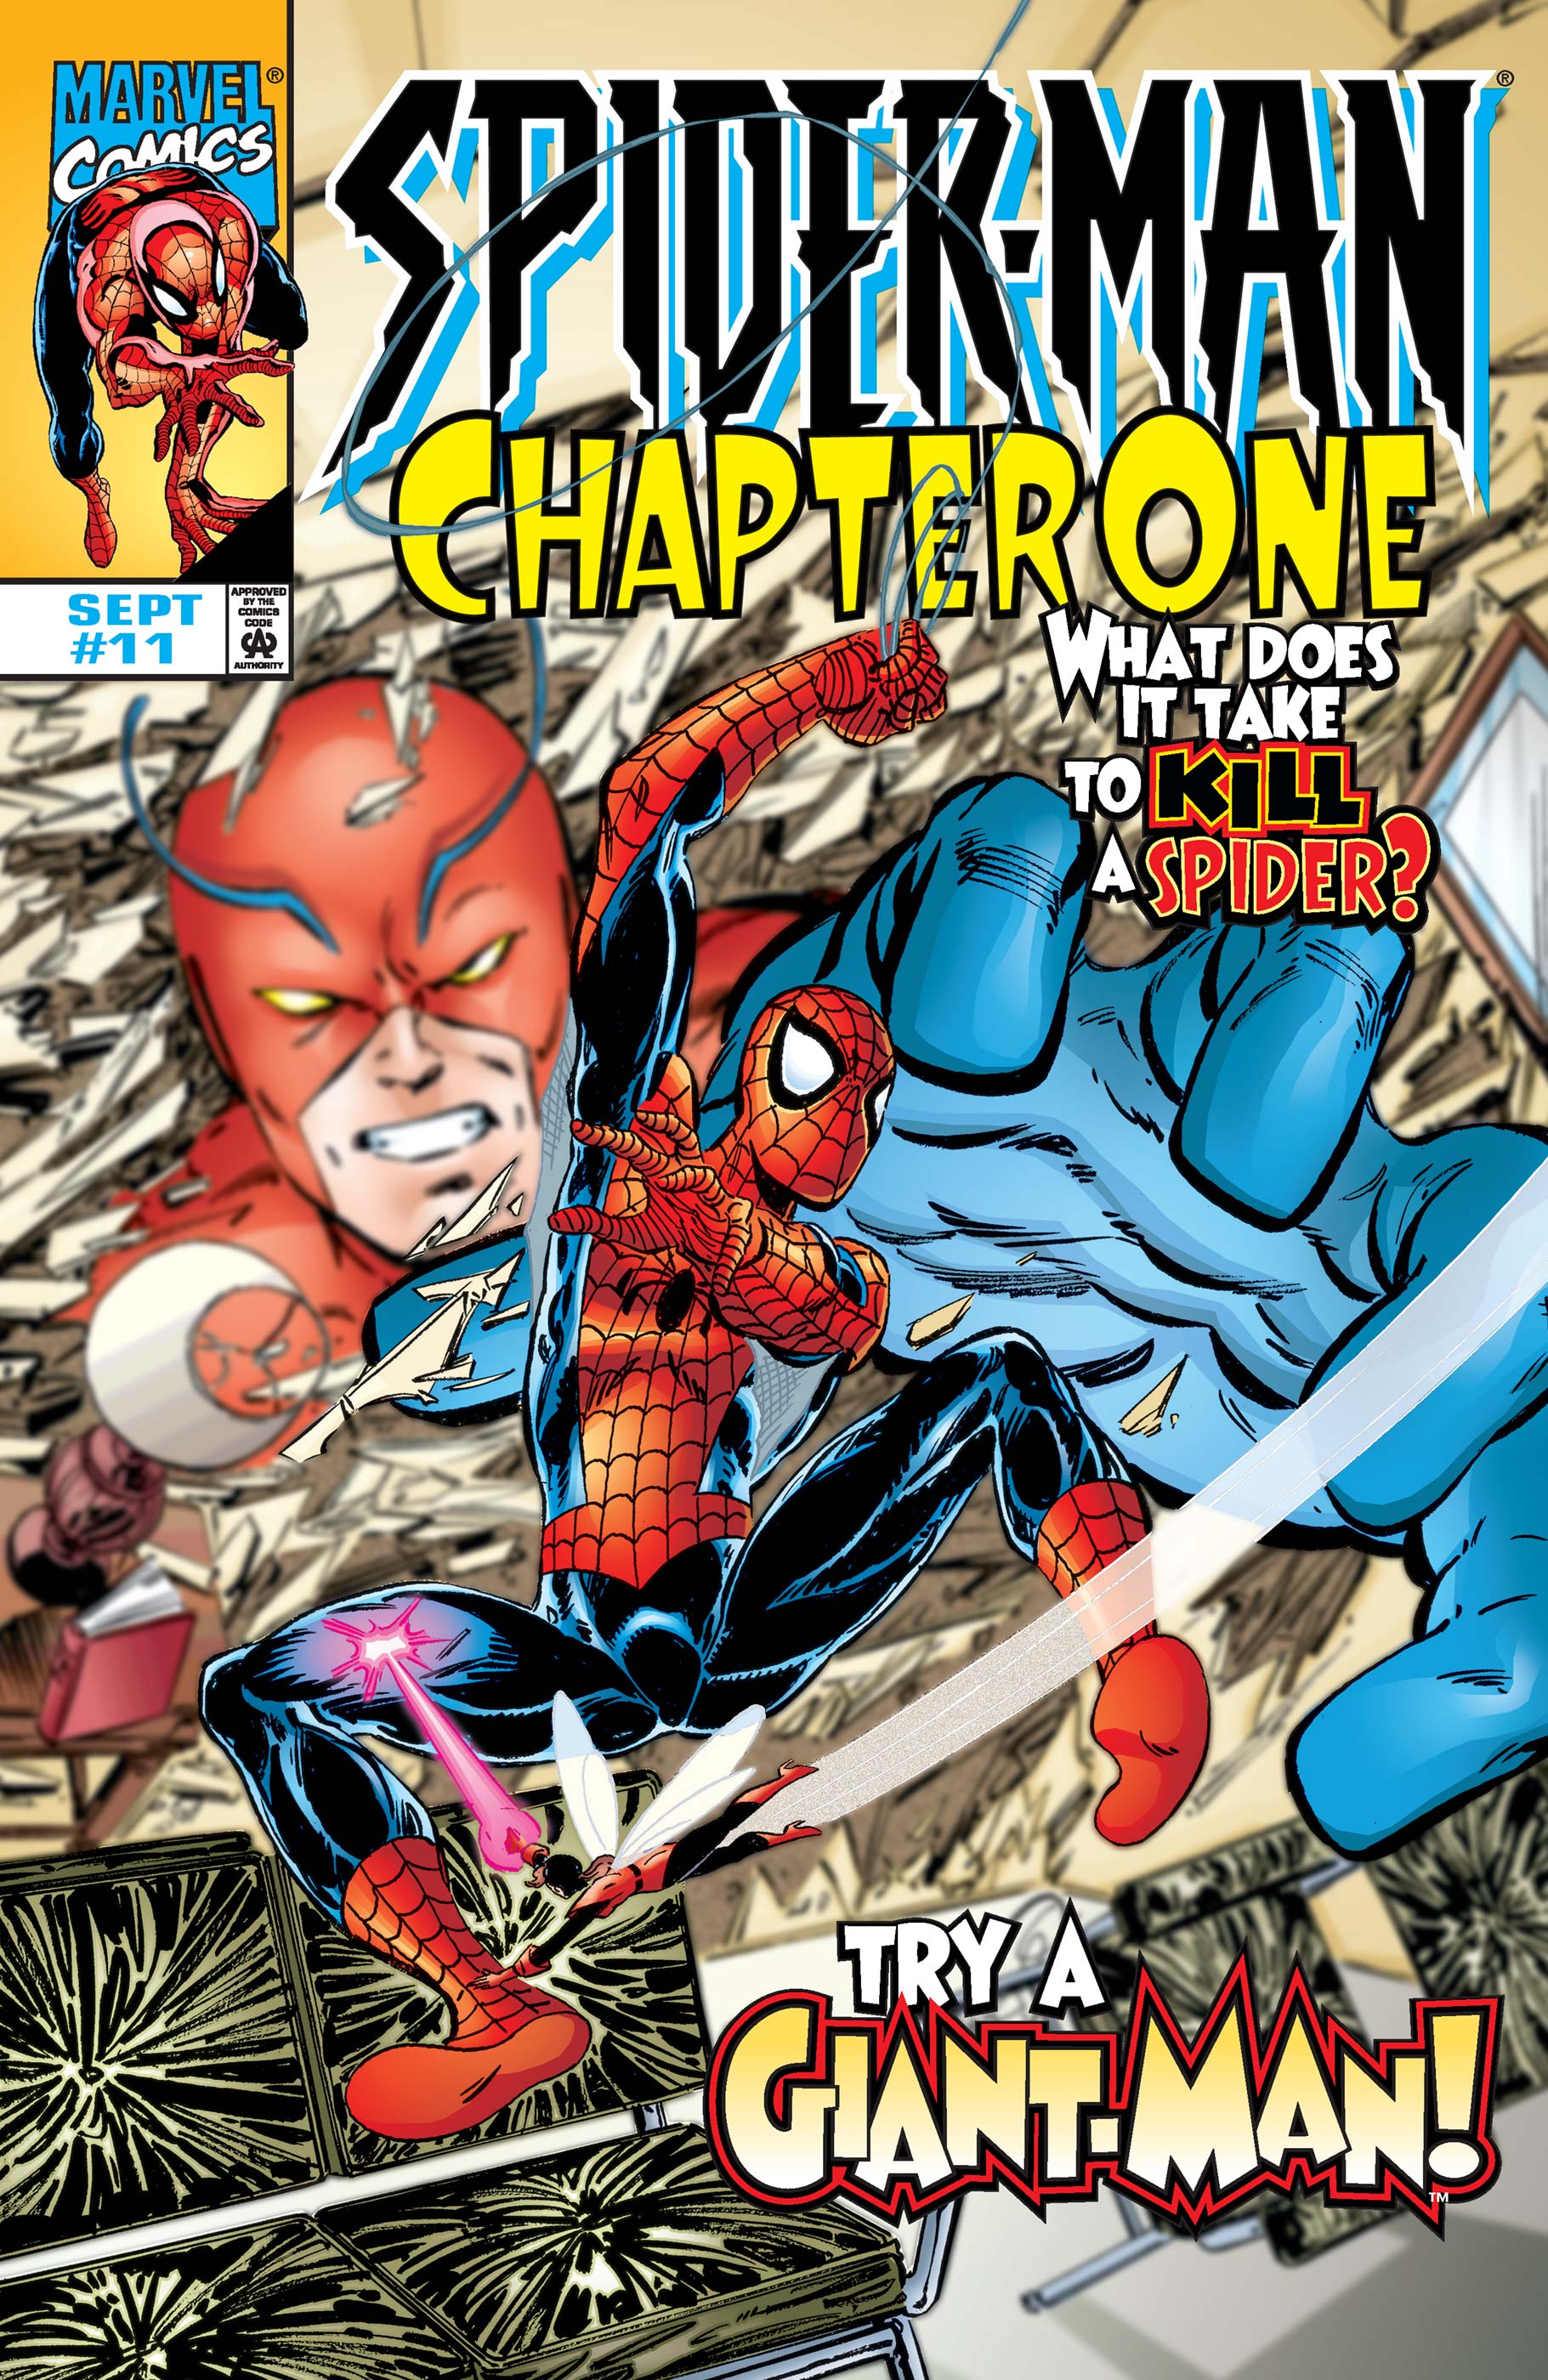 Spider-Man: Chapter One (1998) #11 | Comic Issues | Marvel